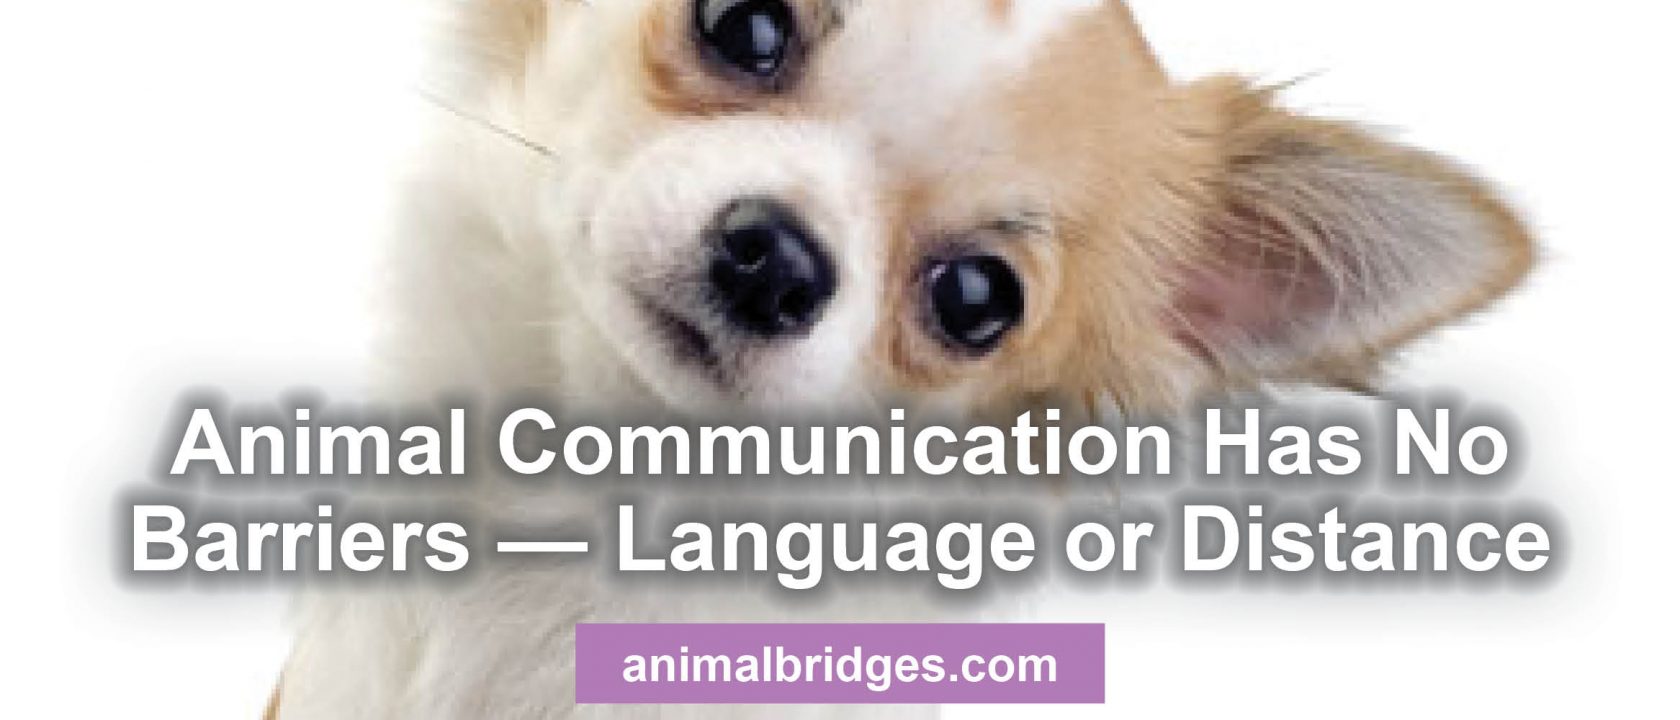 Animal communication has no barriers - language or distance